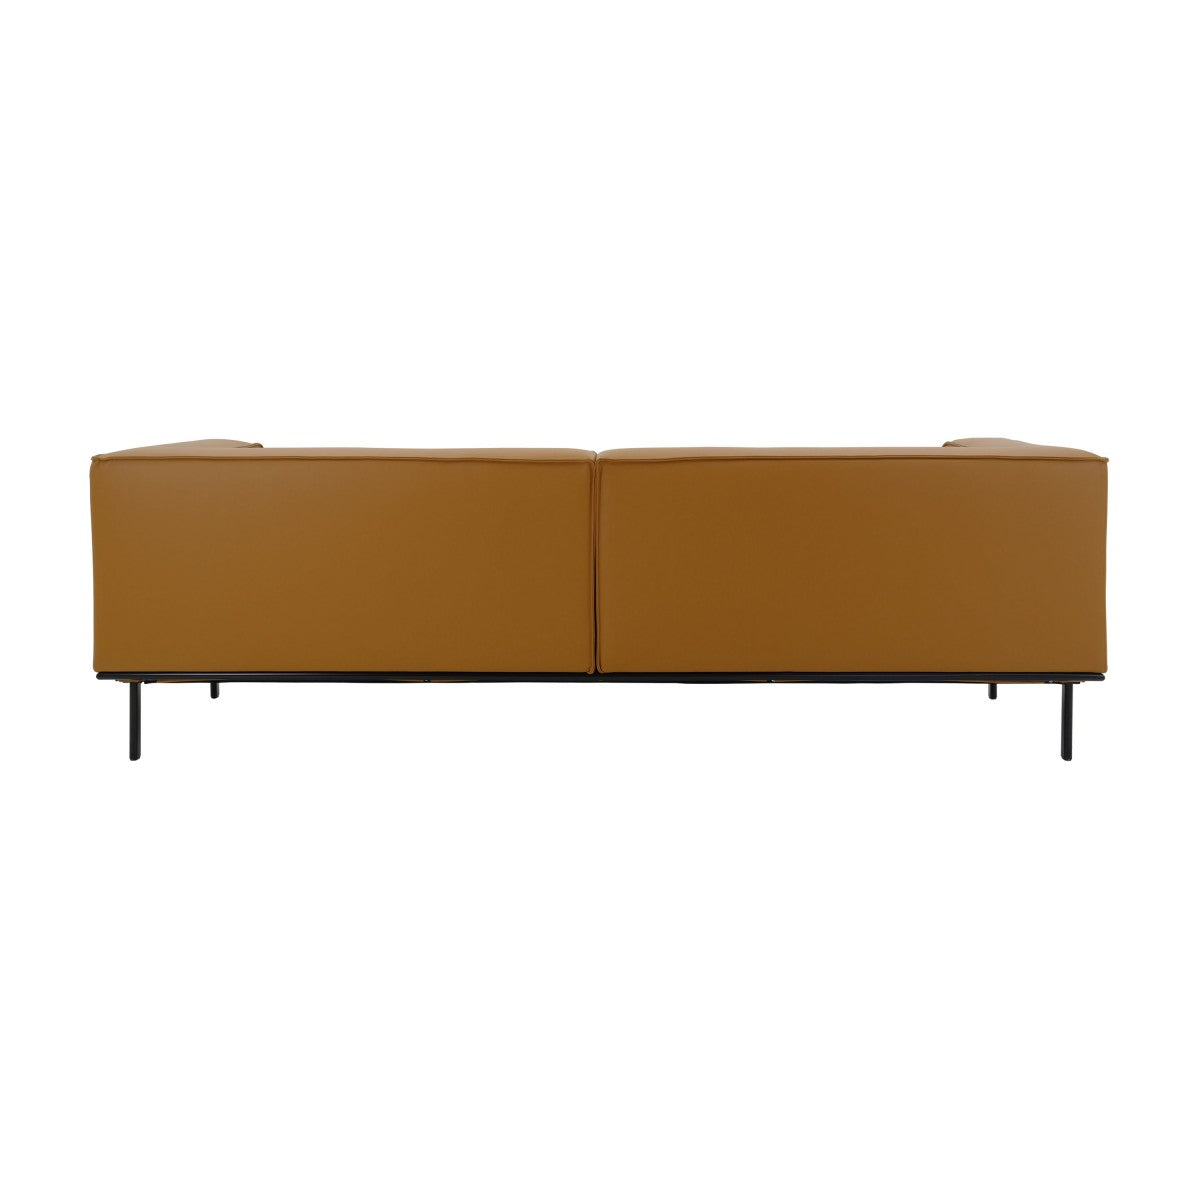 Diplo Bespoke Upholstered Modern Style Five Seater Sofa MS9031G Custom Made To Order